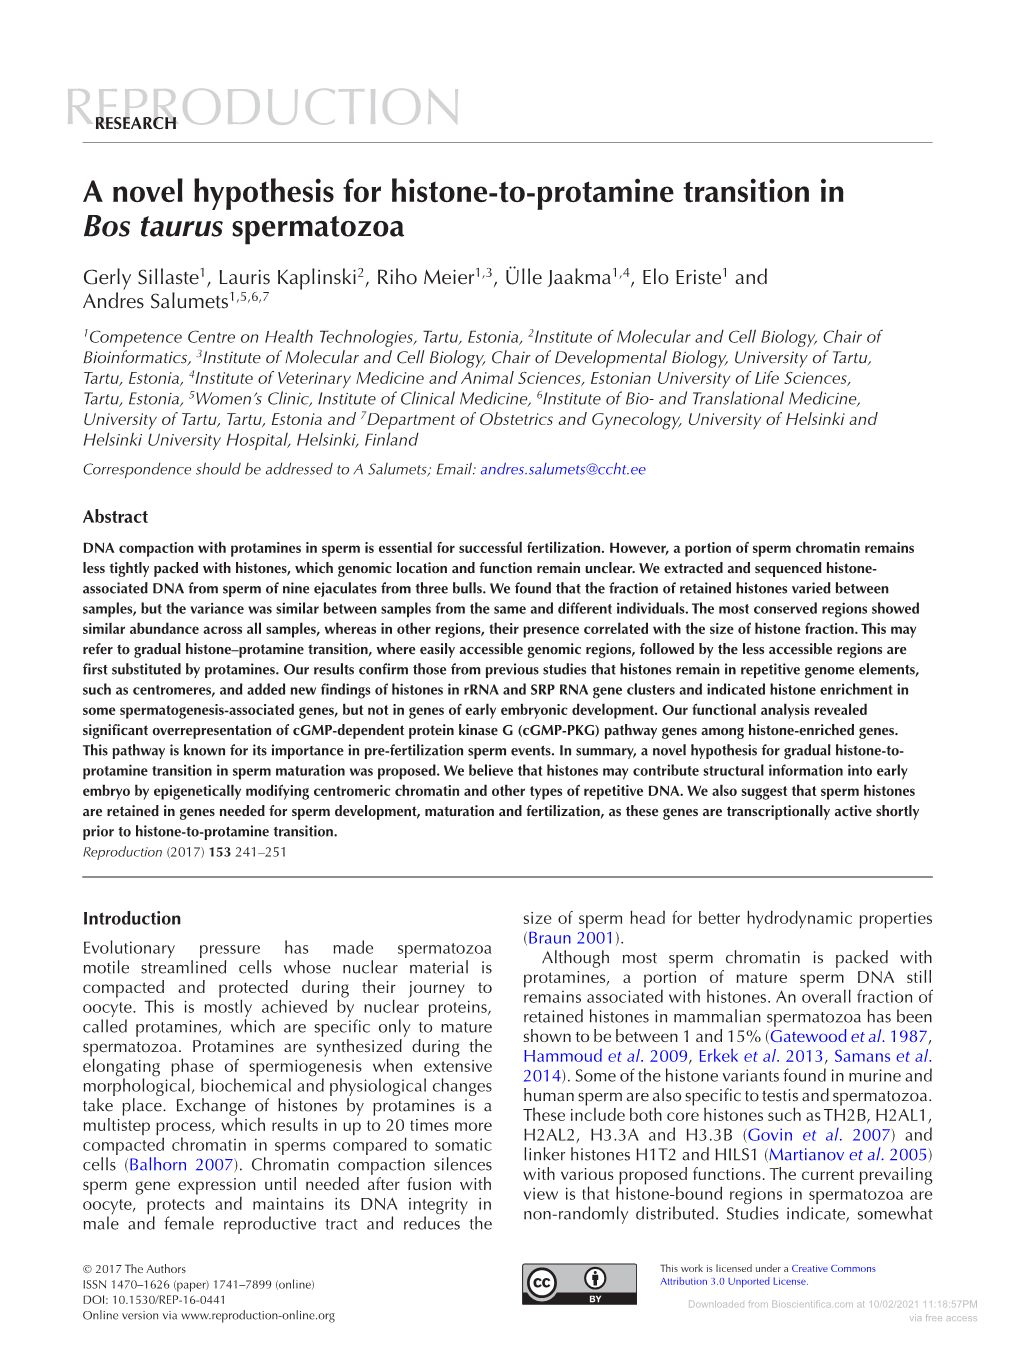 A Novel Hypothesis for Histone-To-Protamine Transition in Bos Taurus Spermatozoa